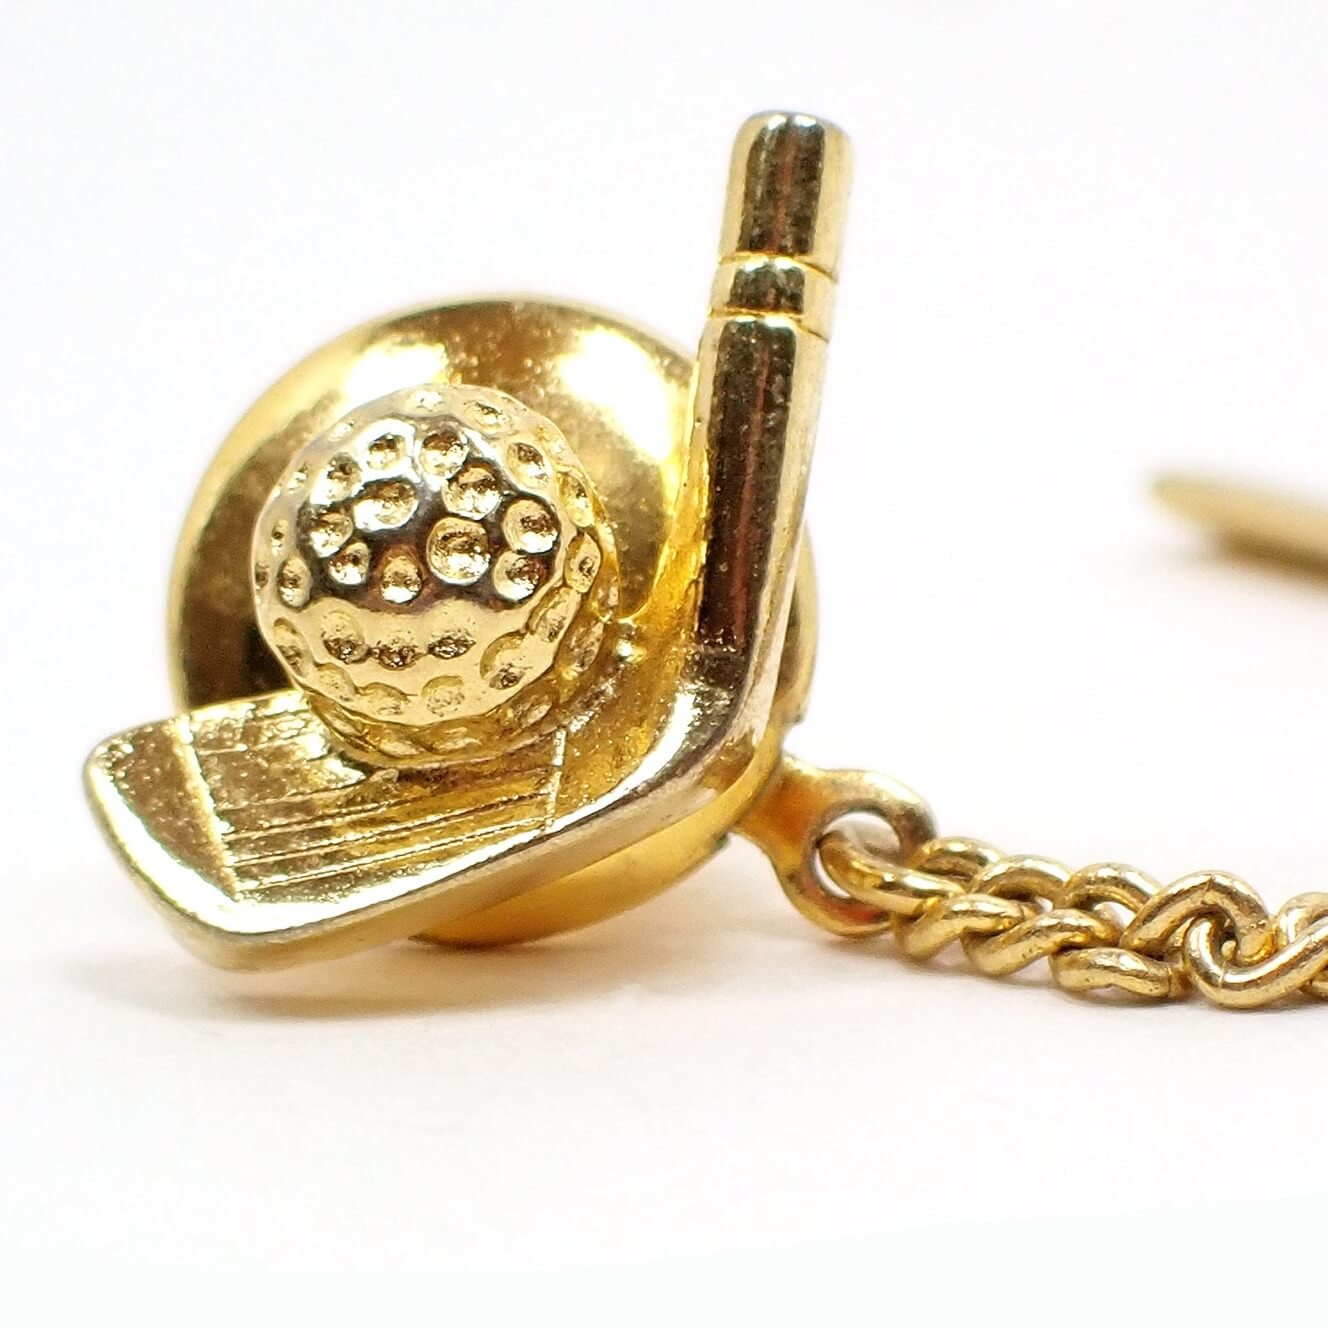 Front view of the retro vintage golfing tie tack. It is gold tone plated in color and has a golf club head and ball design. 